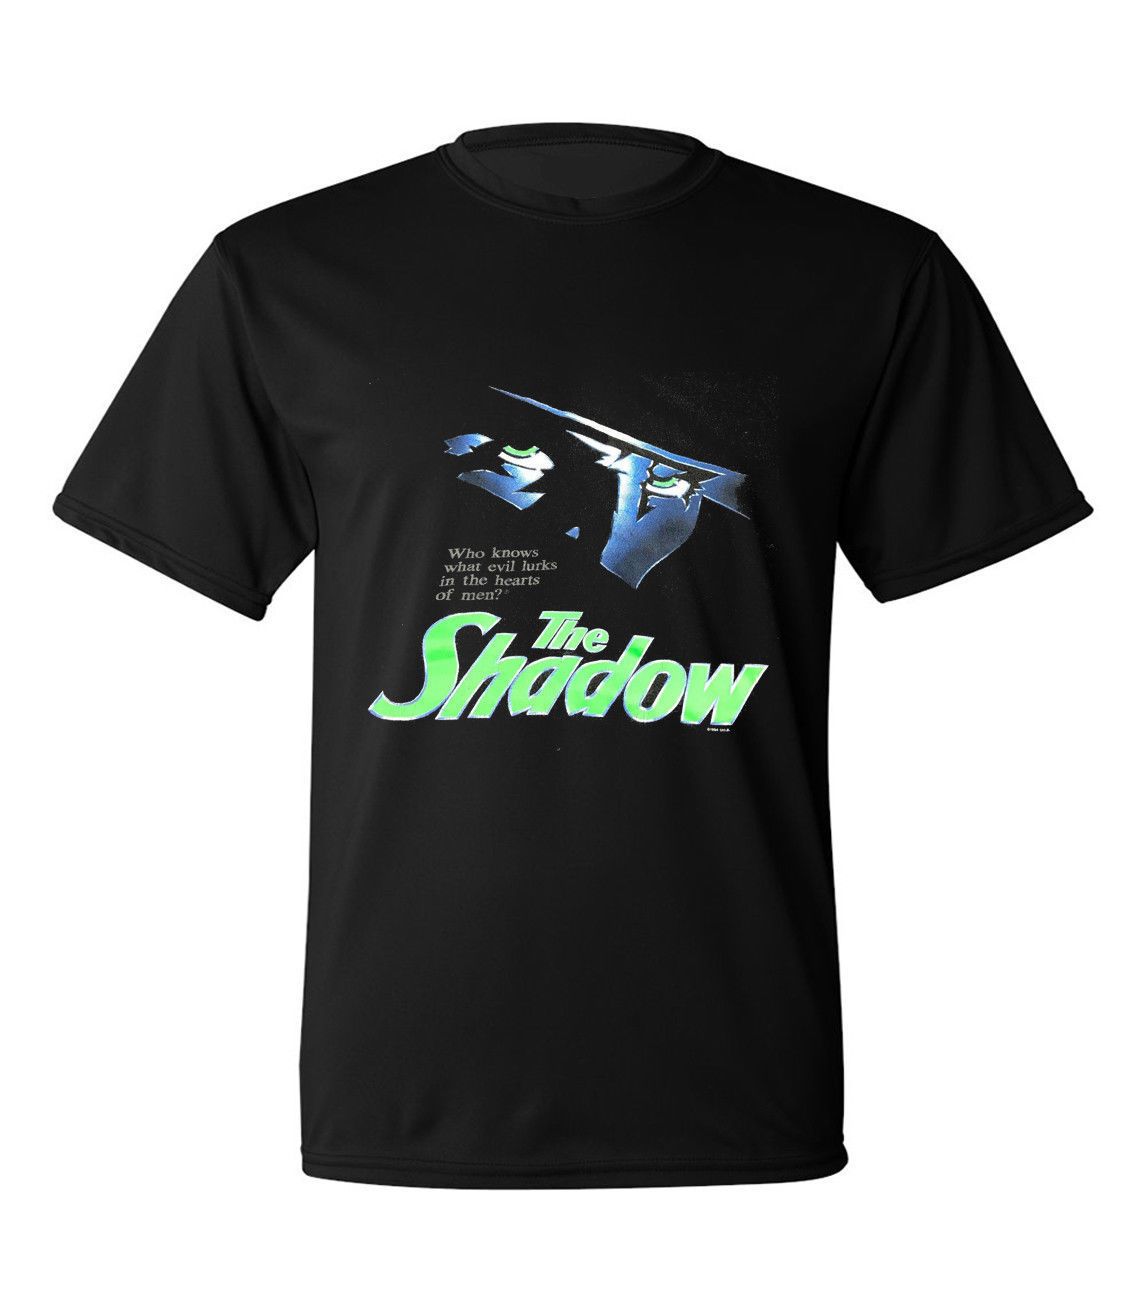 1994 THE SHADOW with Quote Graphic Black TShirt Adult Men's T-Shirt Size S-2XL